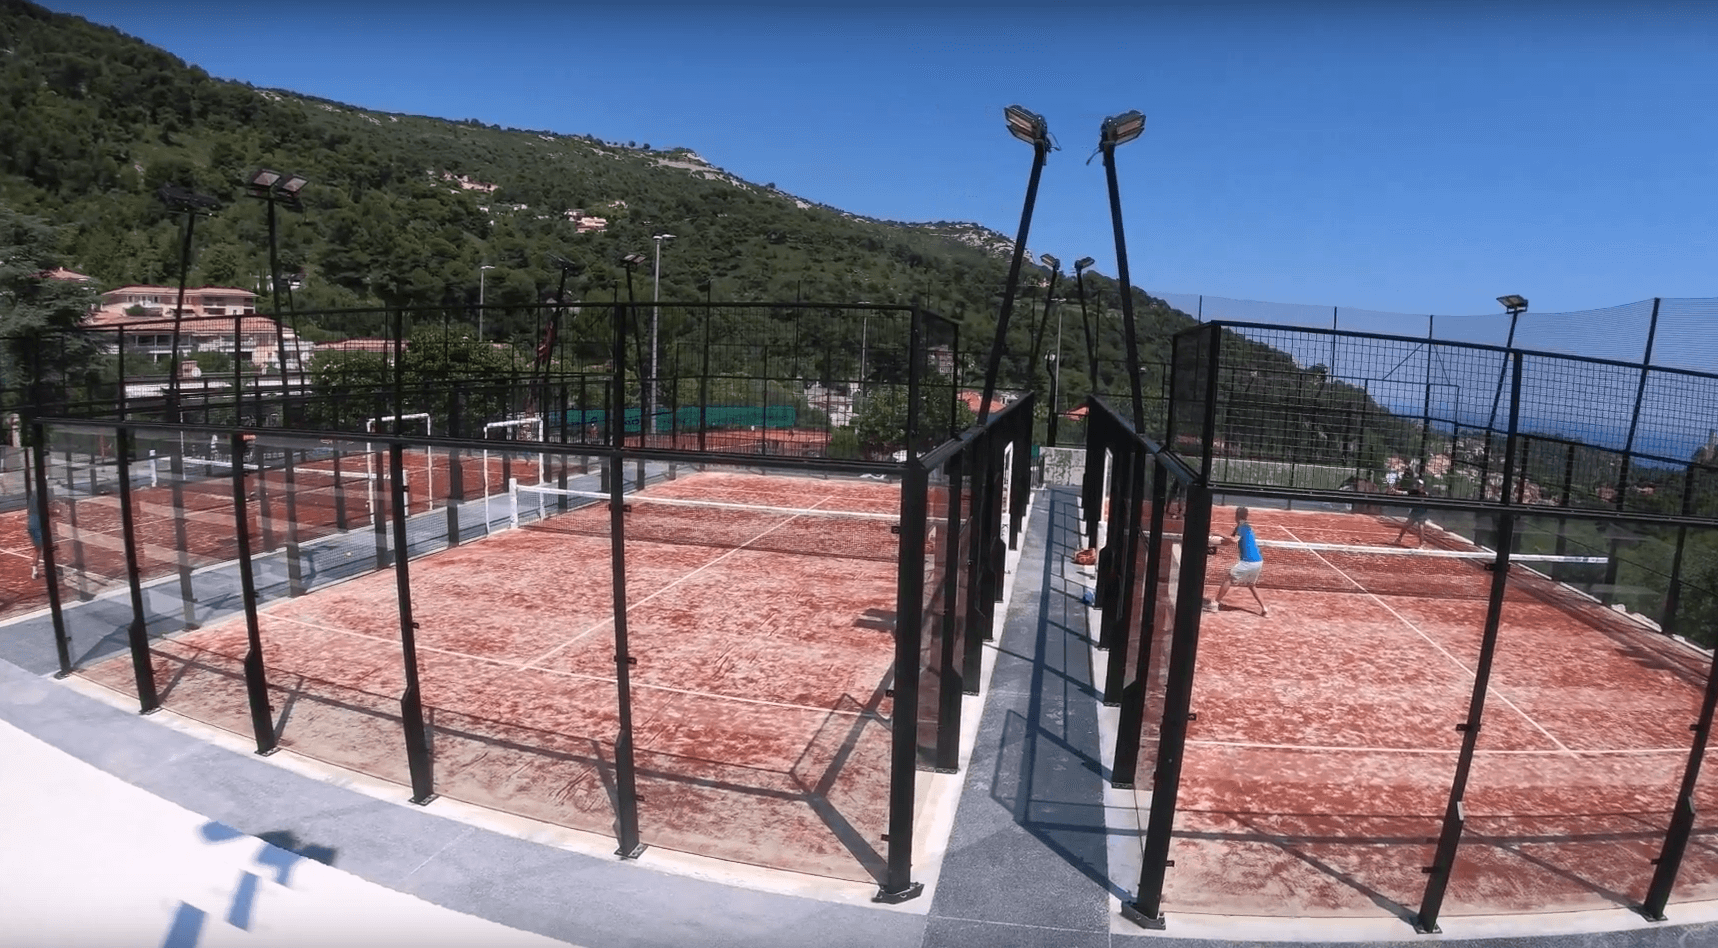 How to have fun otherwise at padel in the south ?